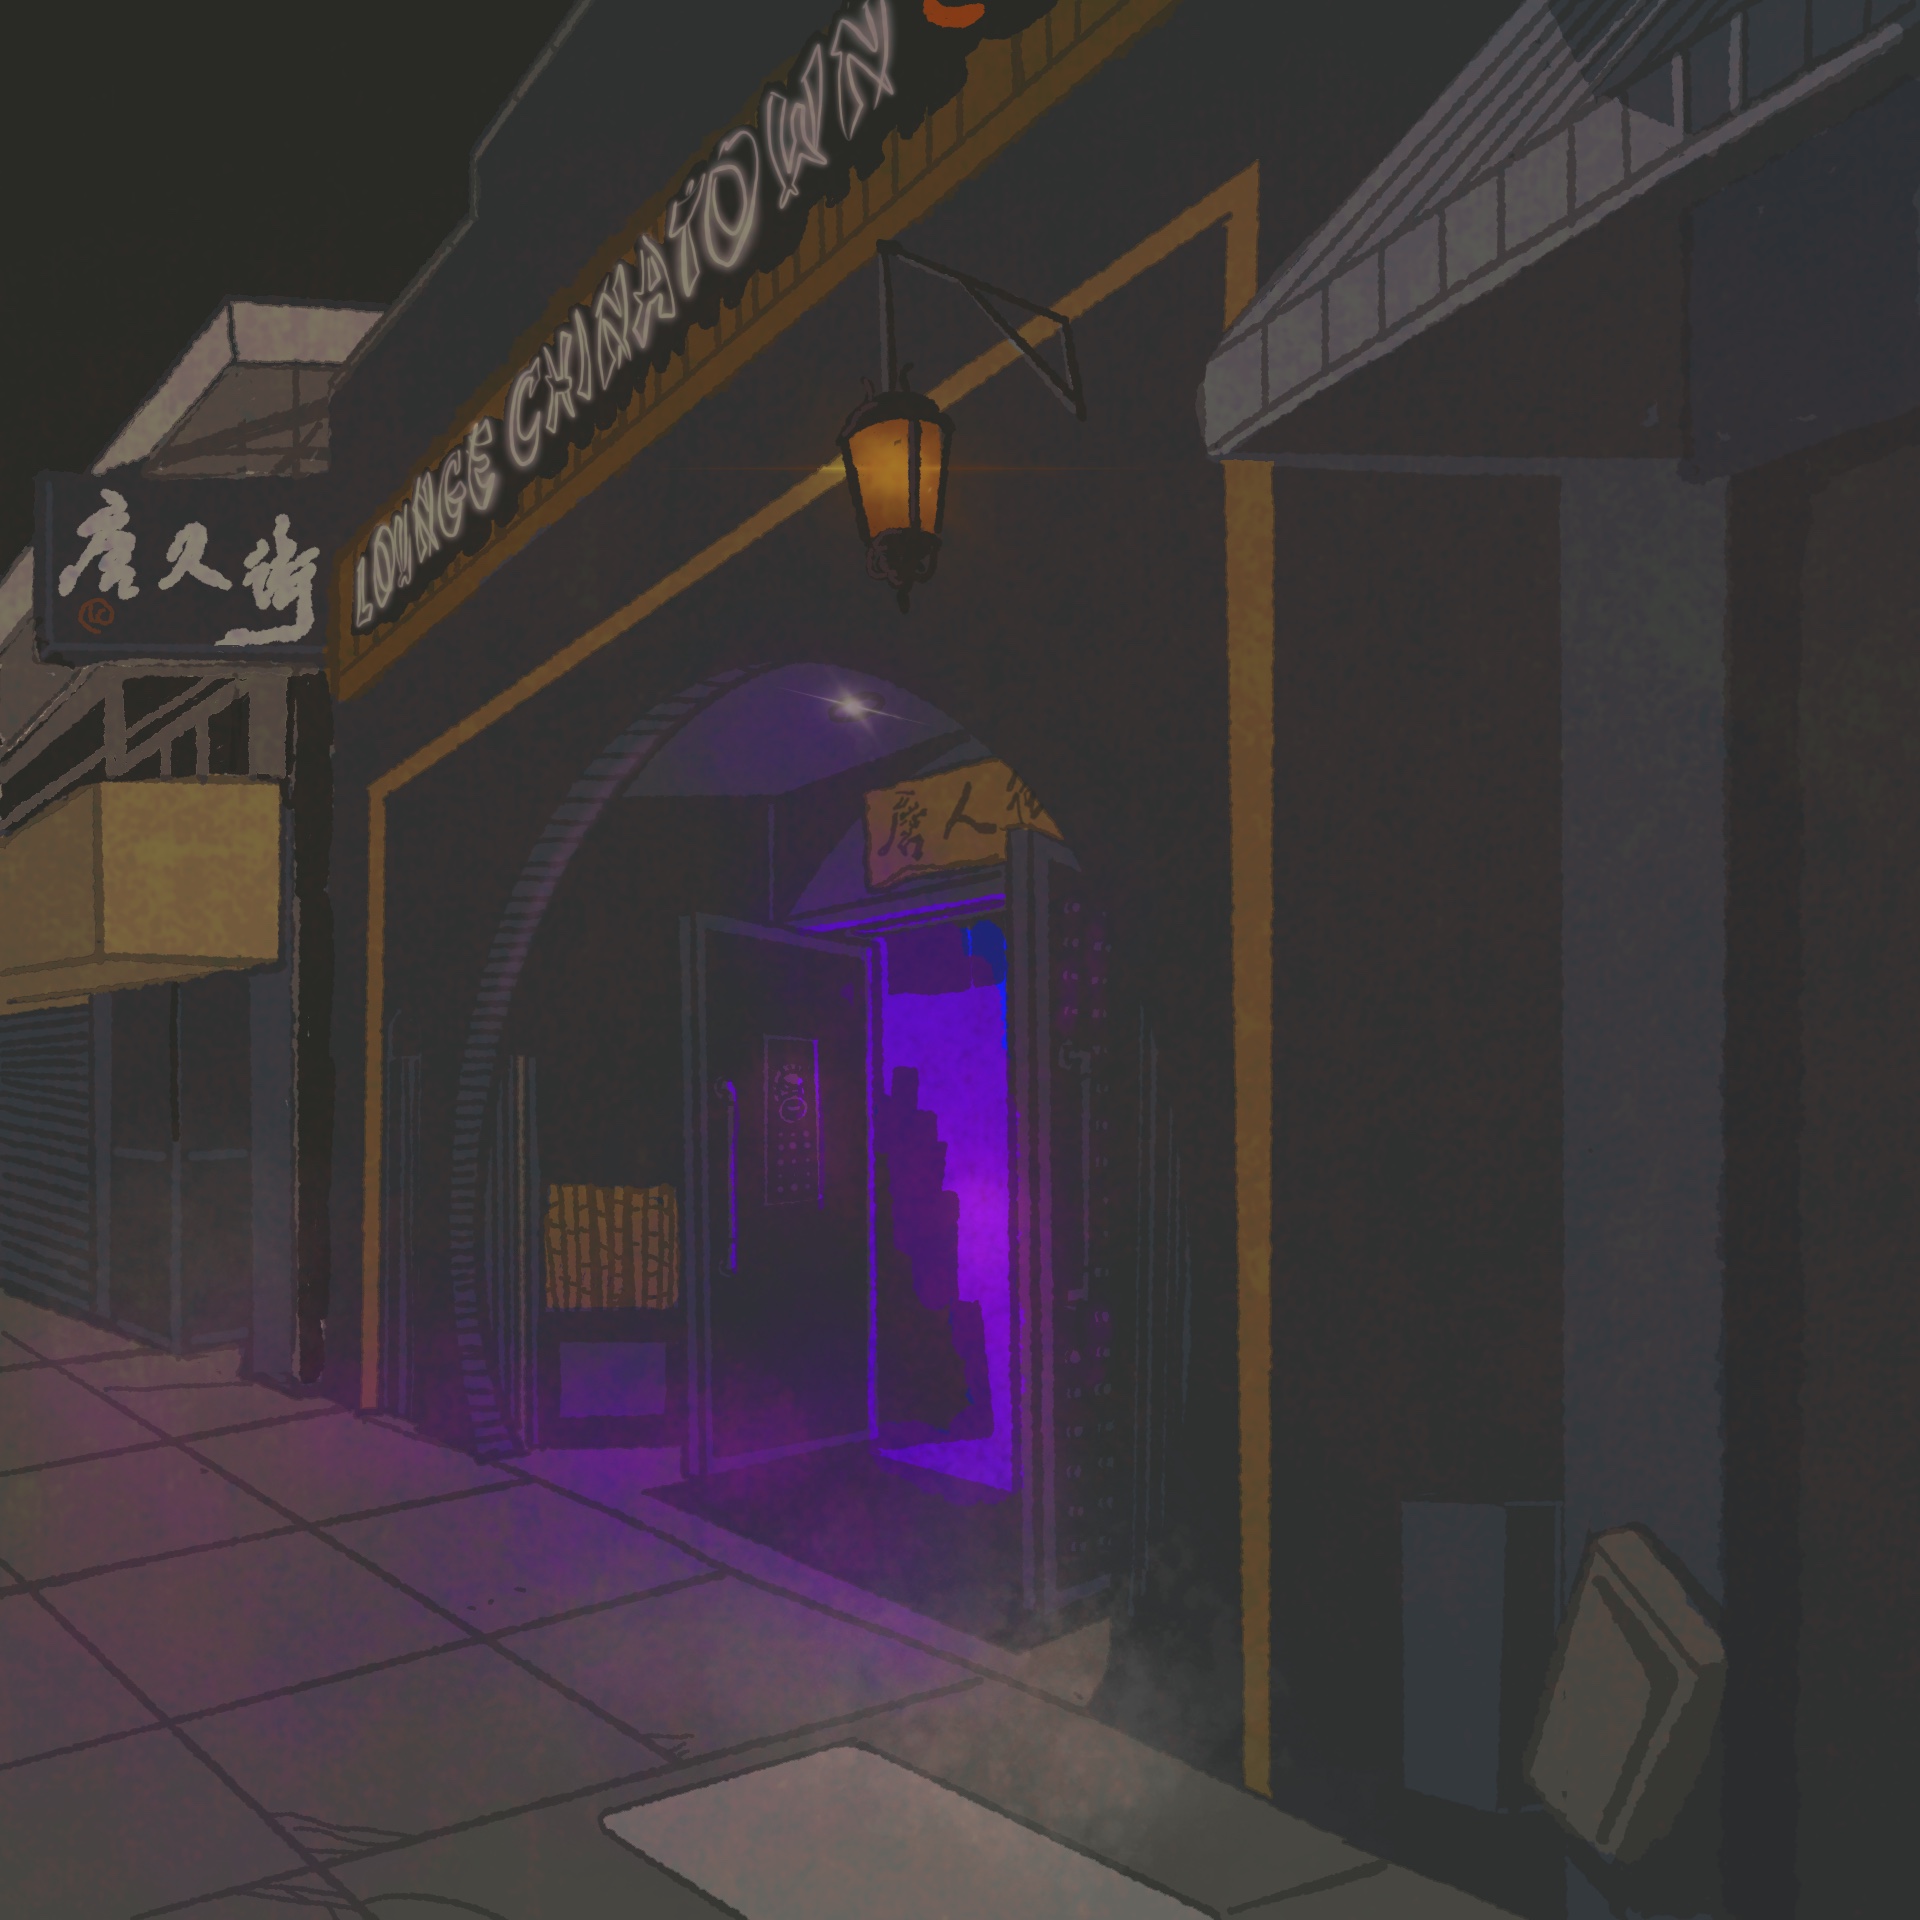 Exterior of a restaurant on a dark street. The sign reads "Lounge Chinatown," and the entrance is suffused in glowing purple light.